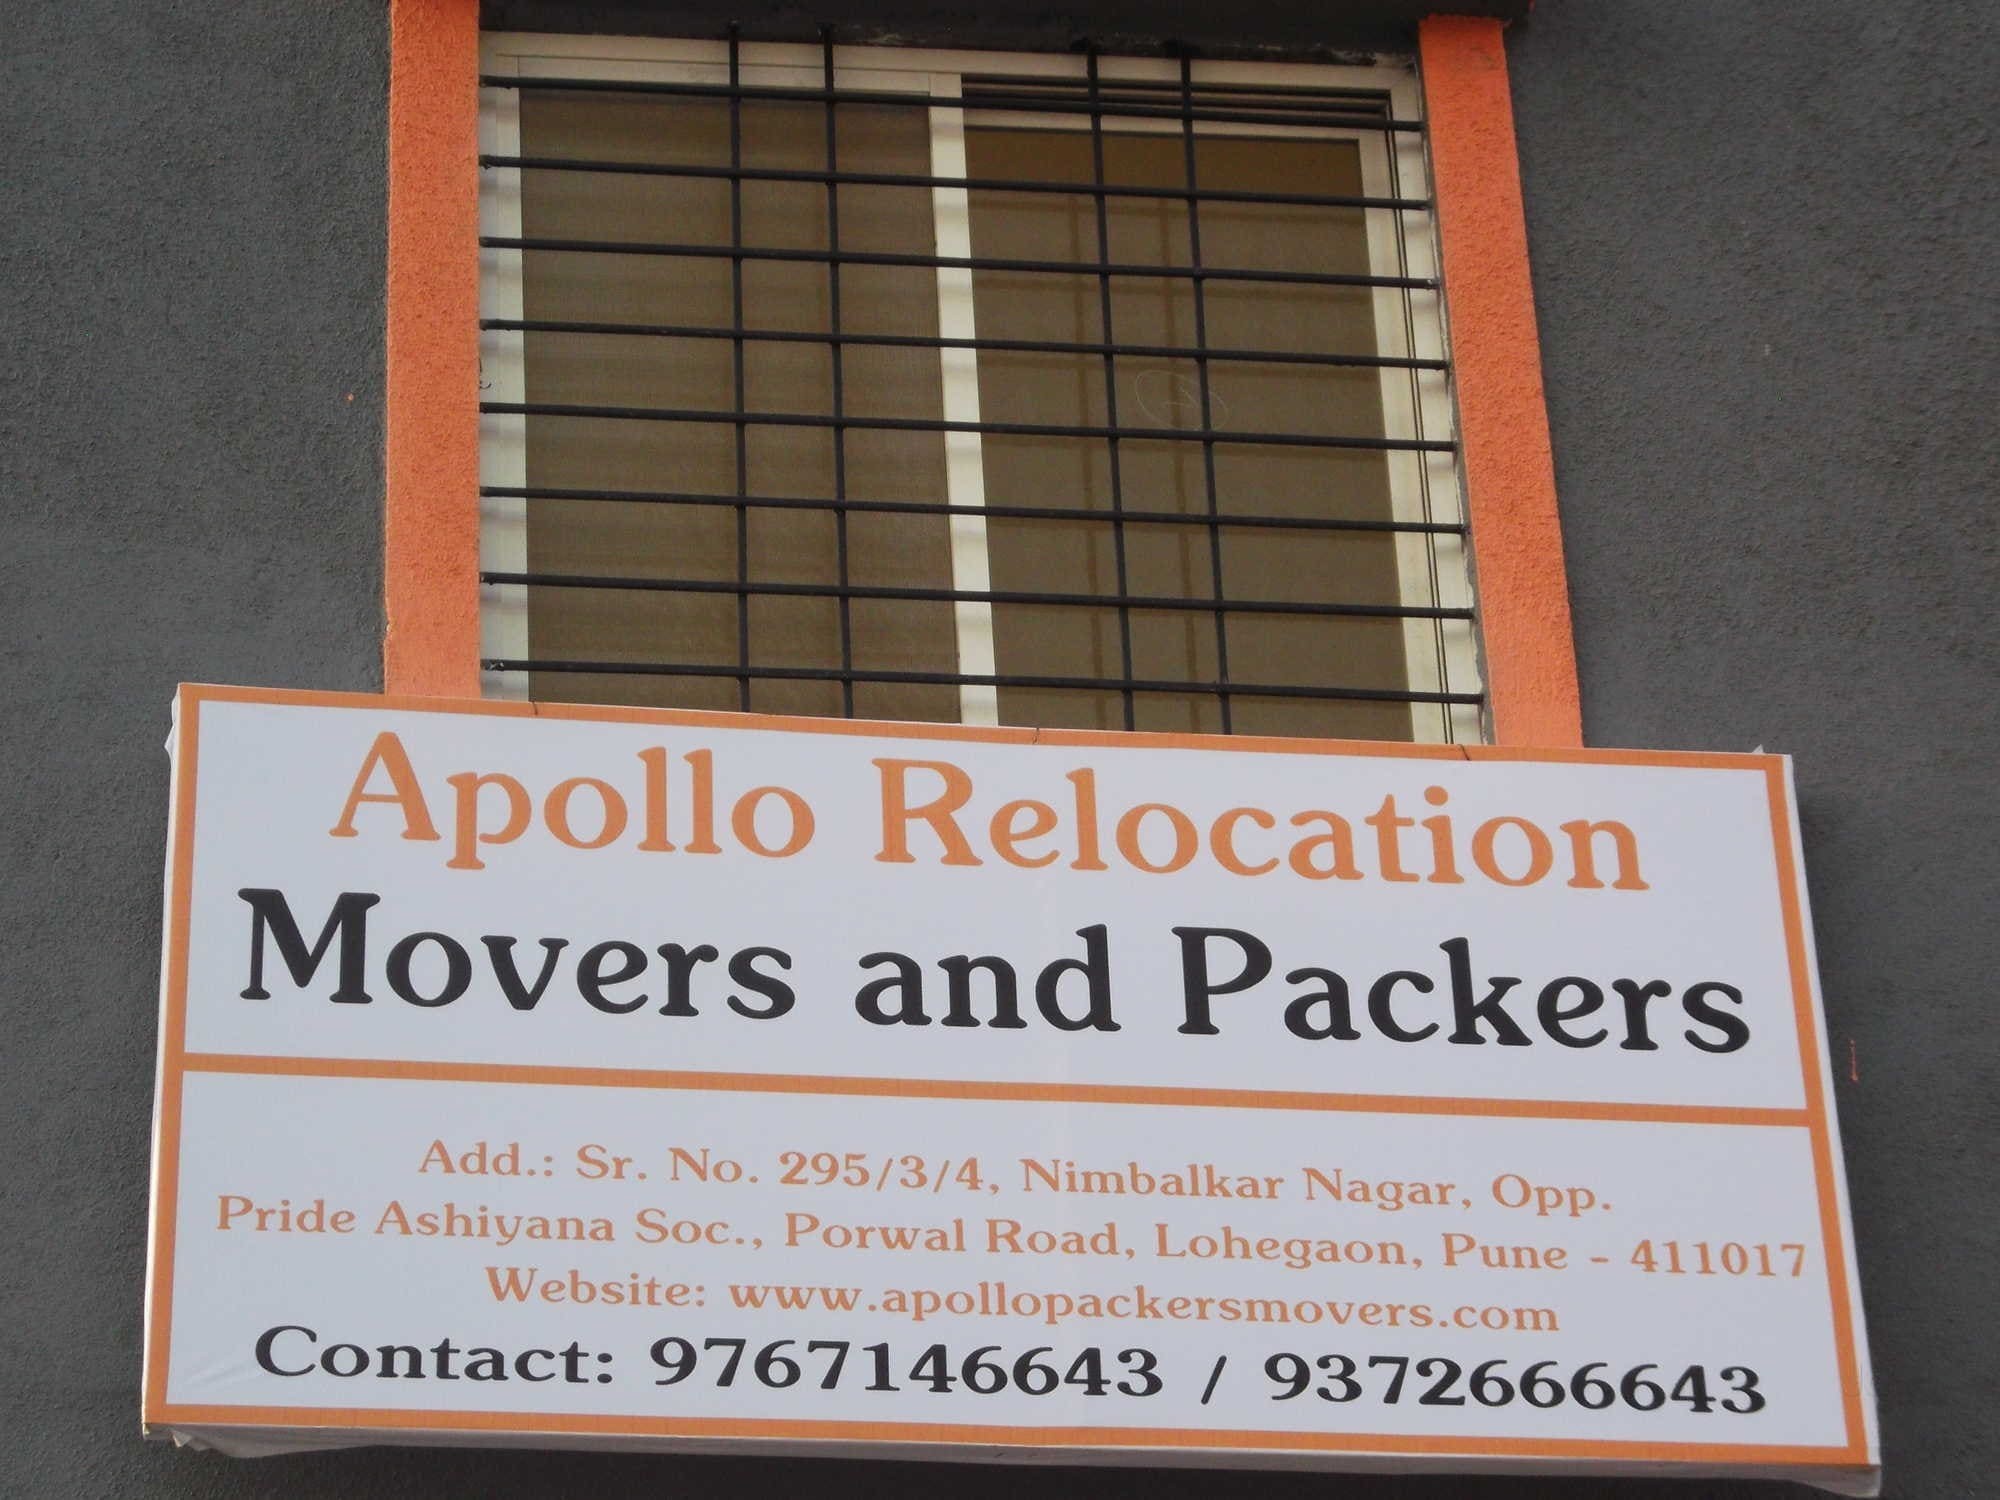 Apollo Packers Movers in Pune